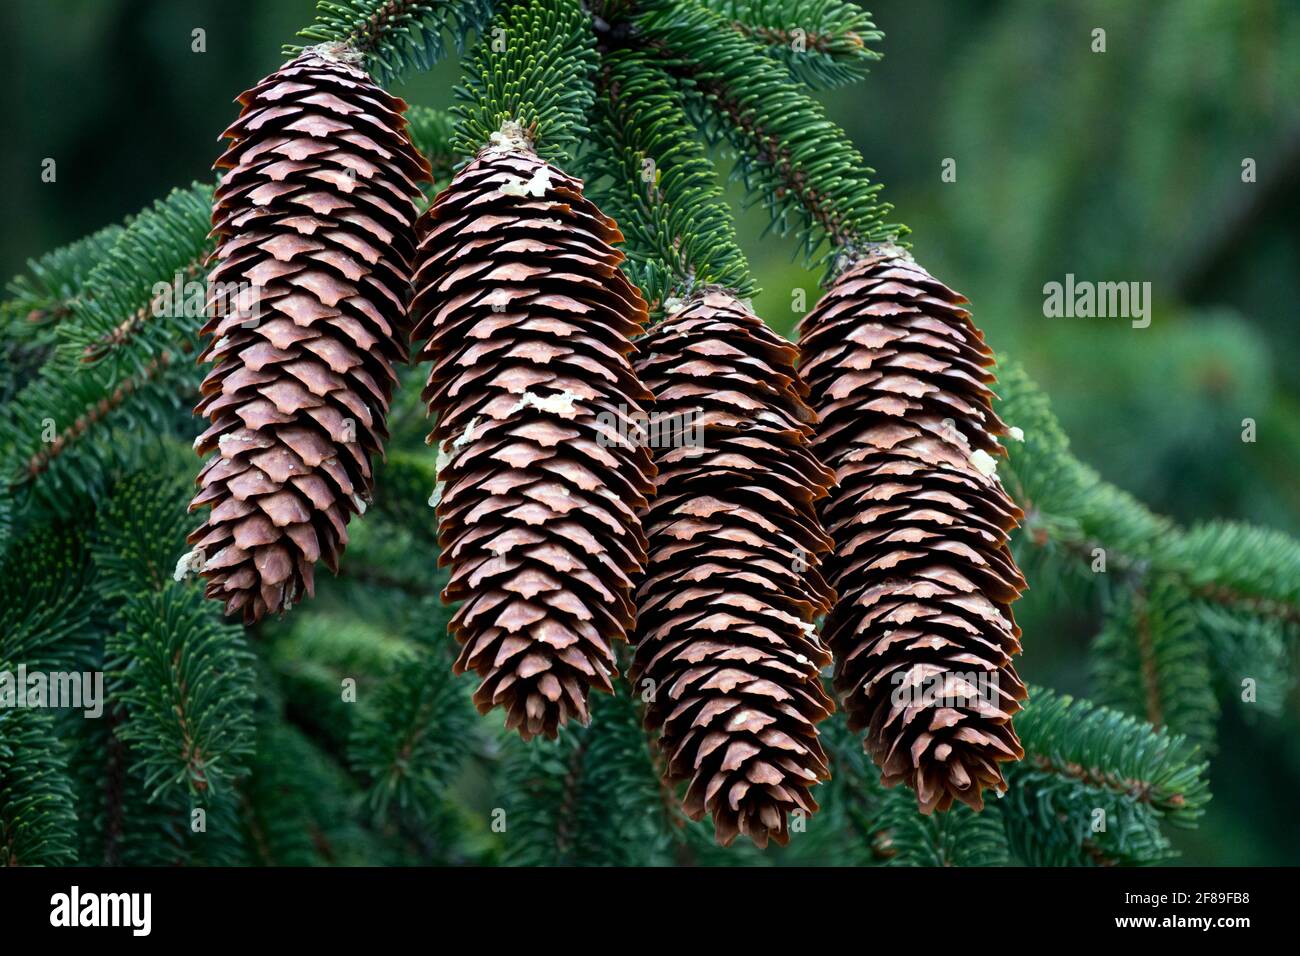 Four Norway spruce cones Picea abies Stock Photo